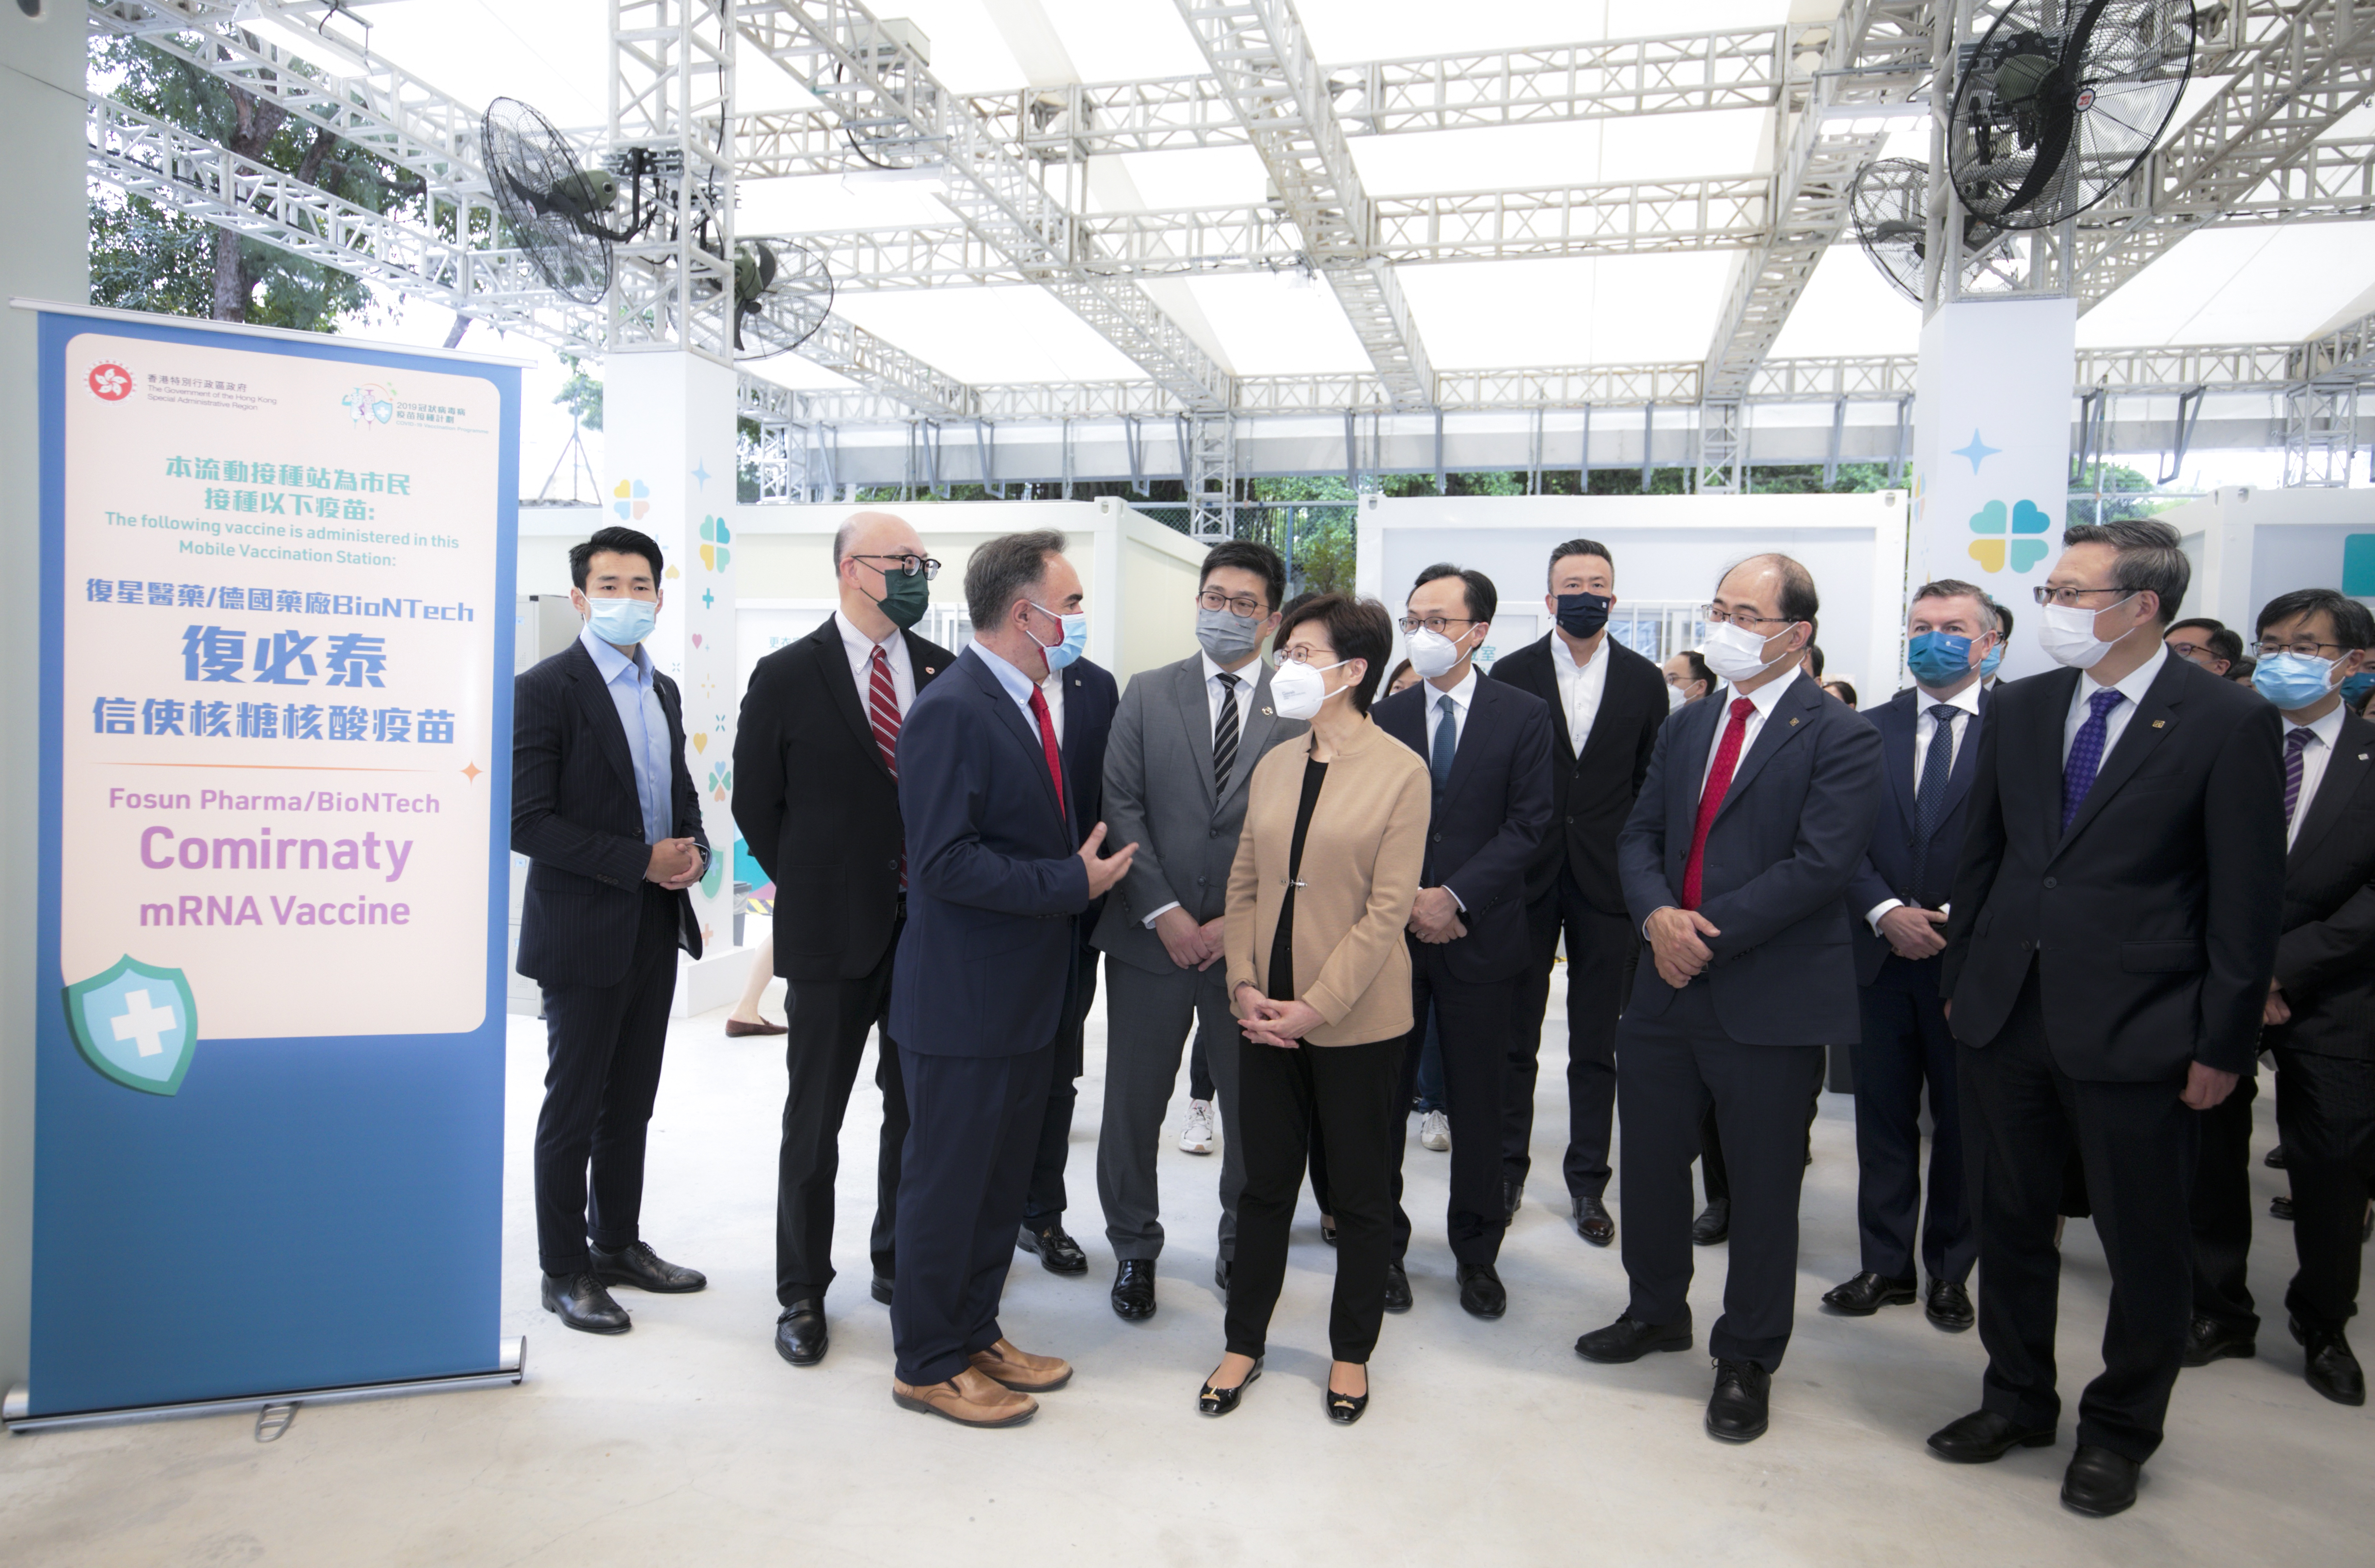 The Chief Executive Carrie Lam and Secretary for the Civil Service Patrick Nip visit the new pop-up Community Vaccination Centre at Caroline Hill Road site, jointly offered by Chinachem Group and Hysan Development, on the first day of its operation.